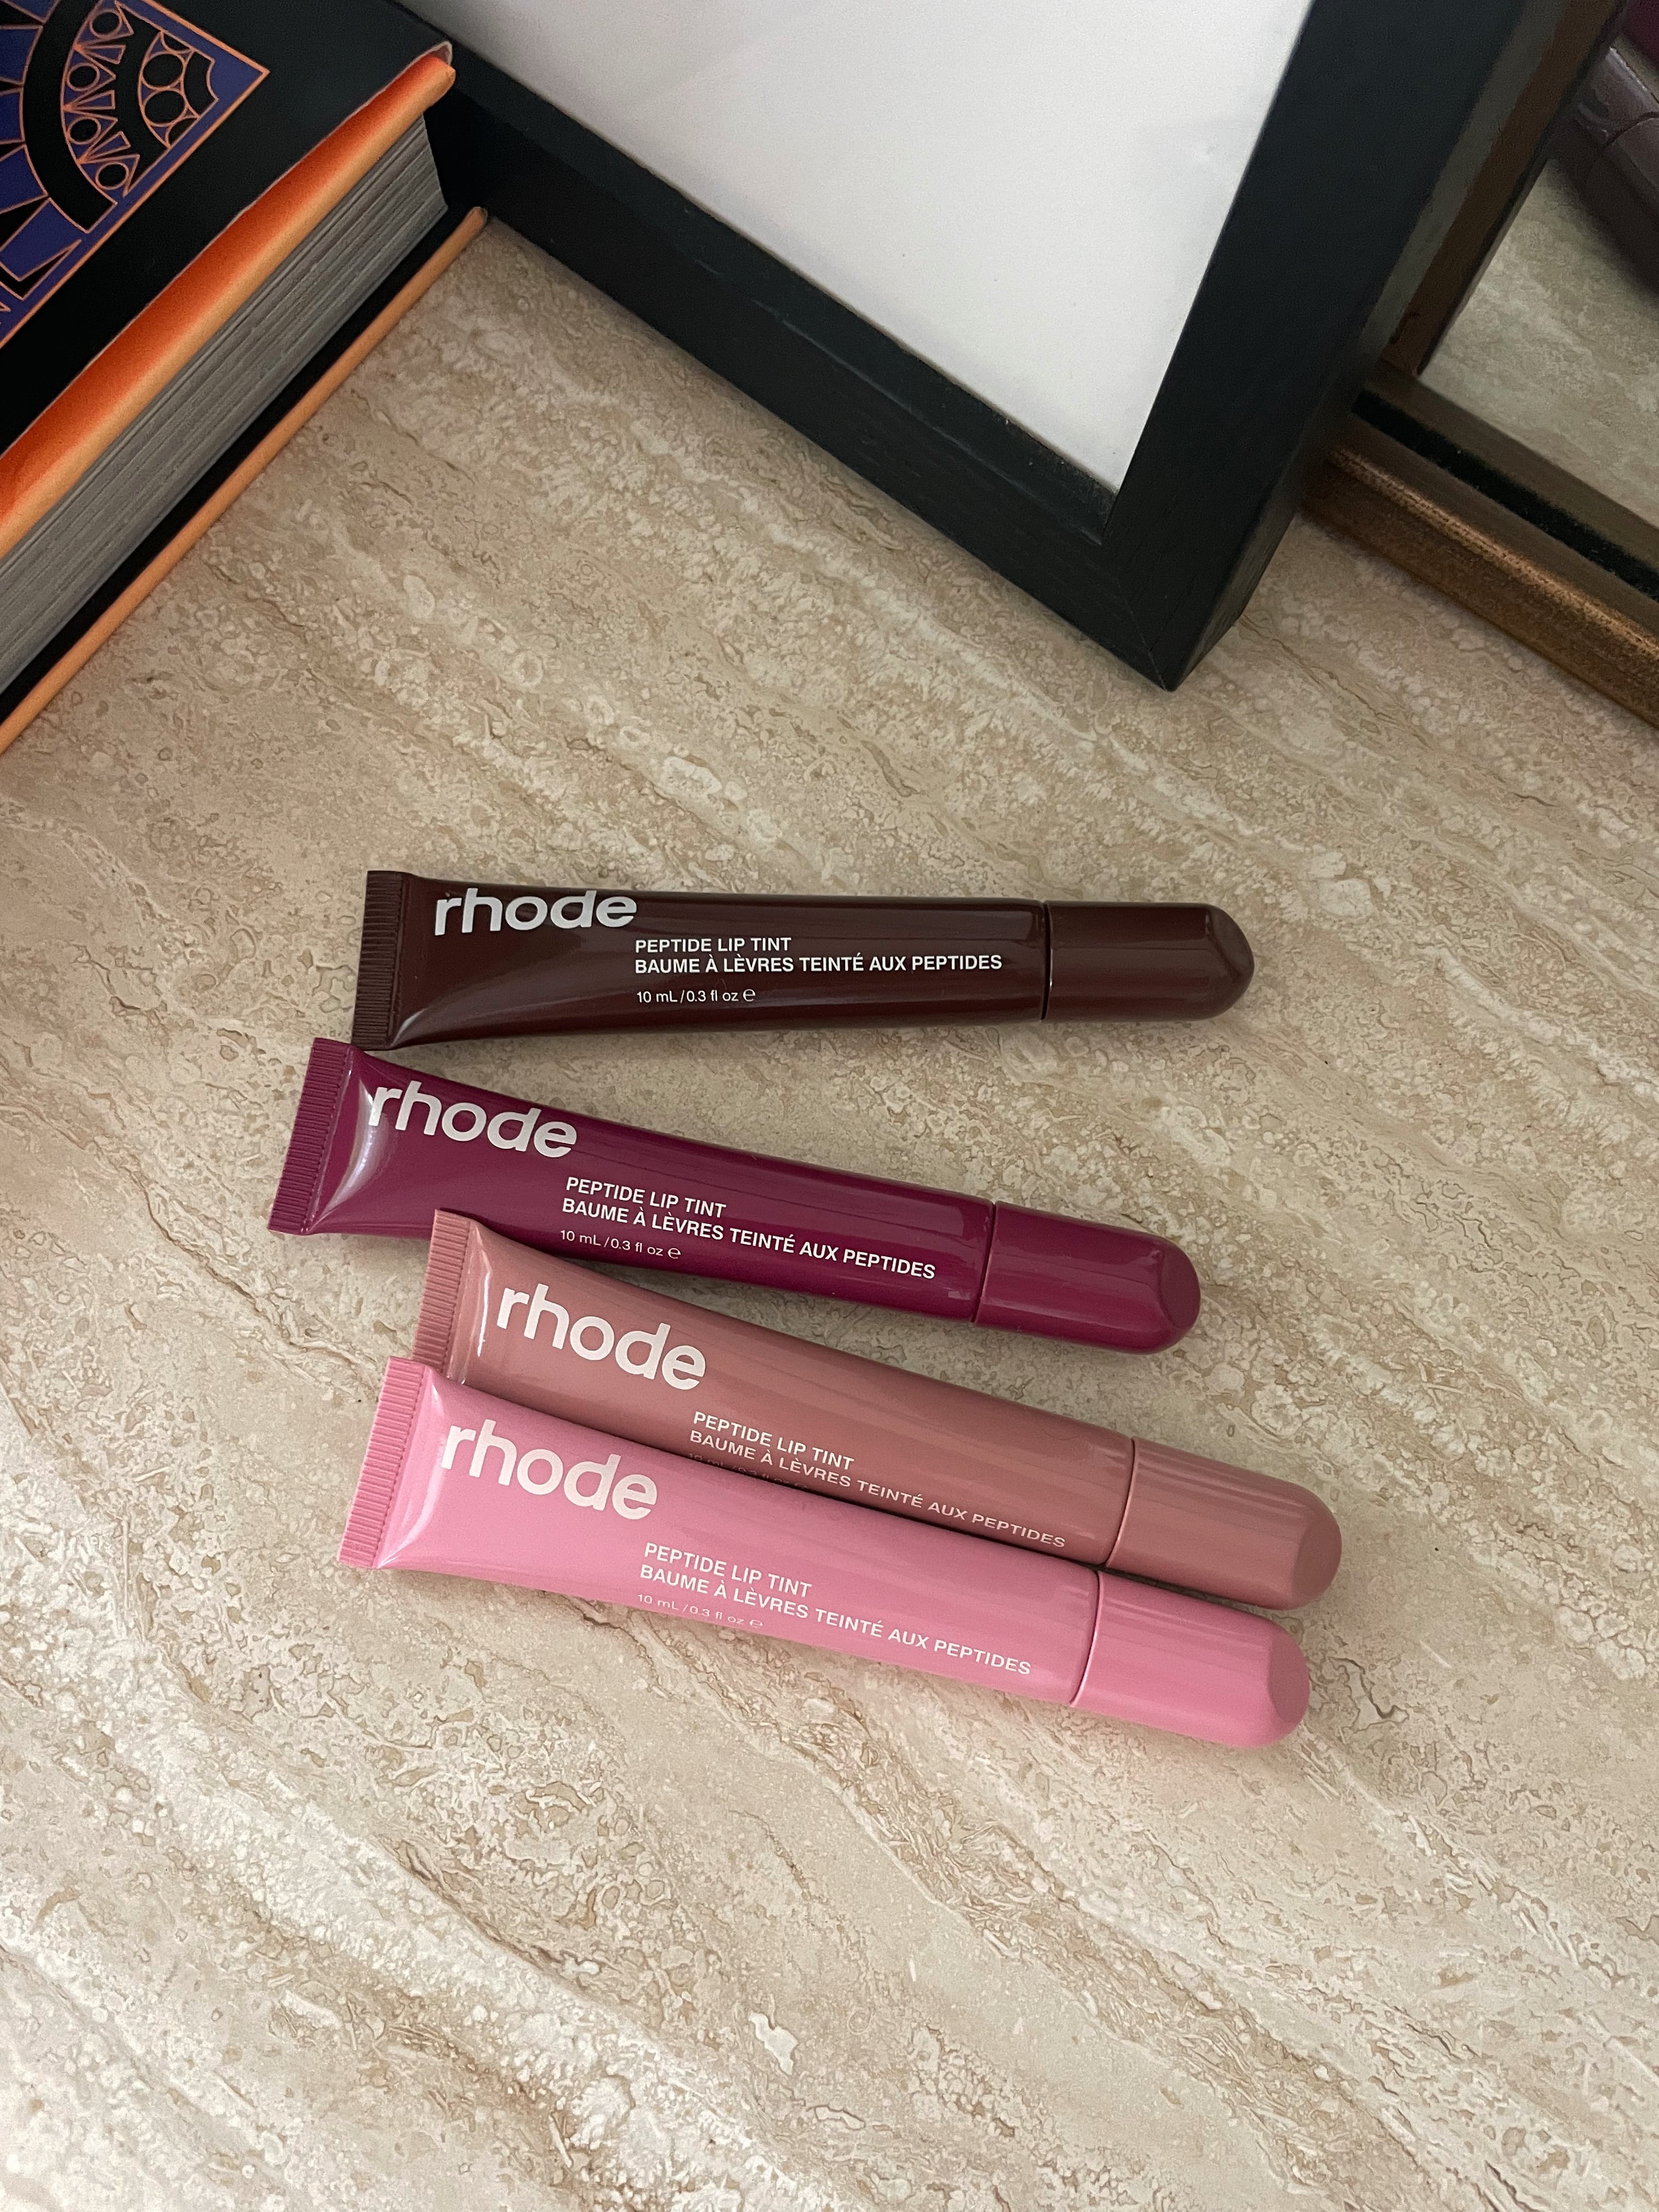 Rhode Peptide Lip Treatment Review With Photos | POPSUGAR Beauty